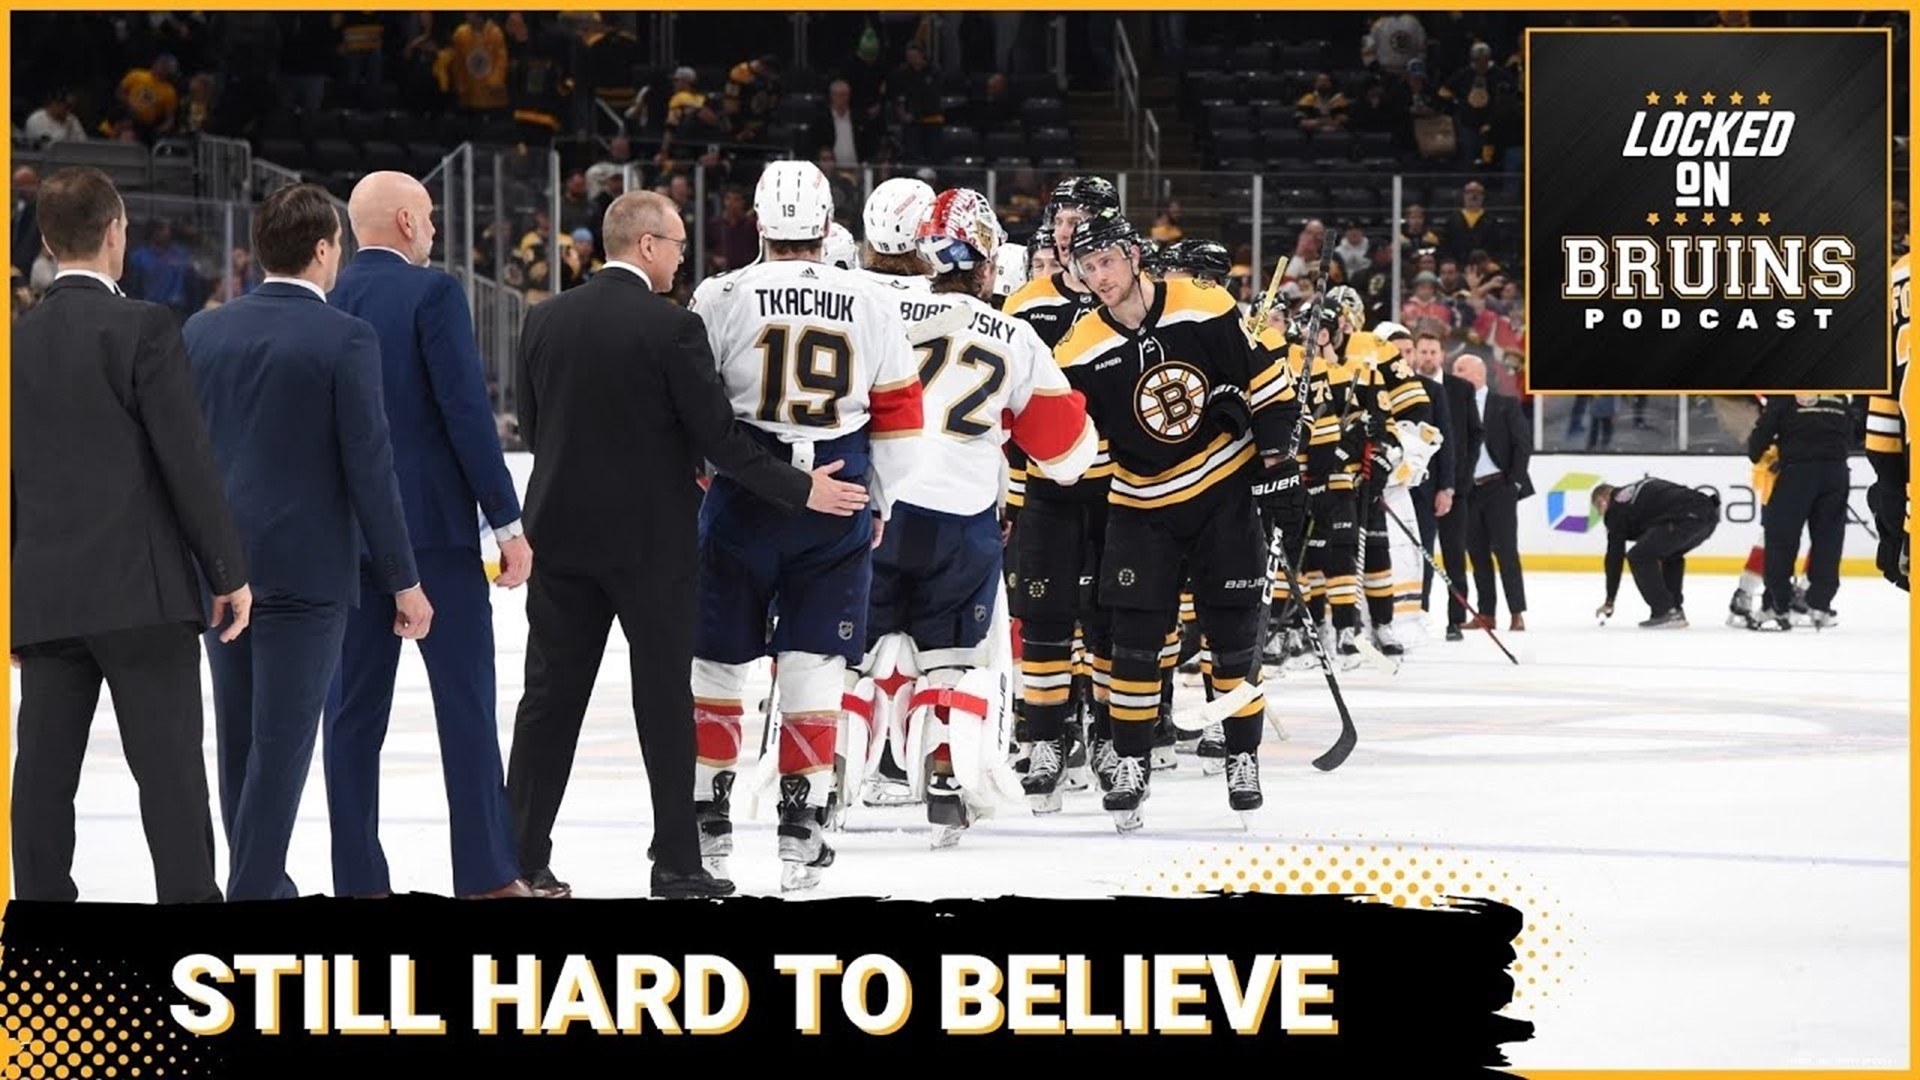 It's still hard to believe the Florida Panthers are in the Stanley Cup Final and the Boston Bruins are not.